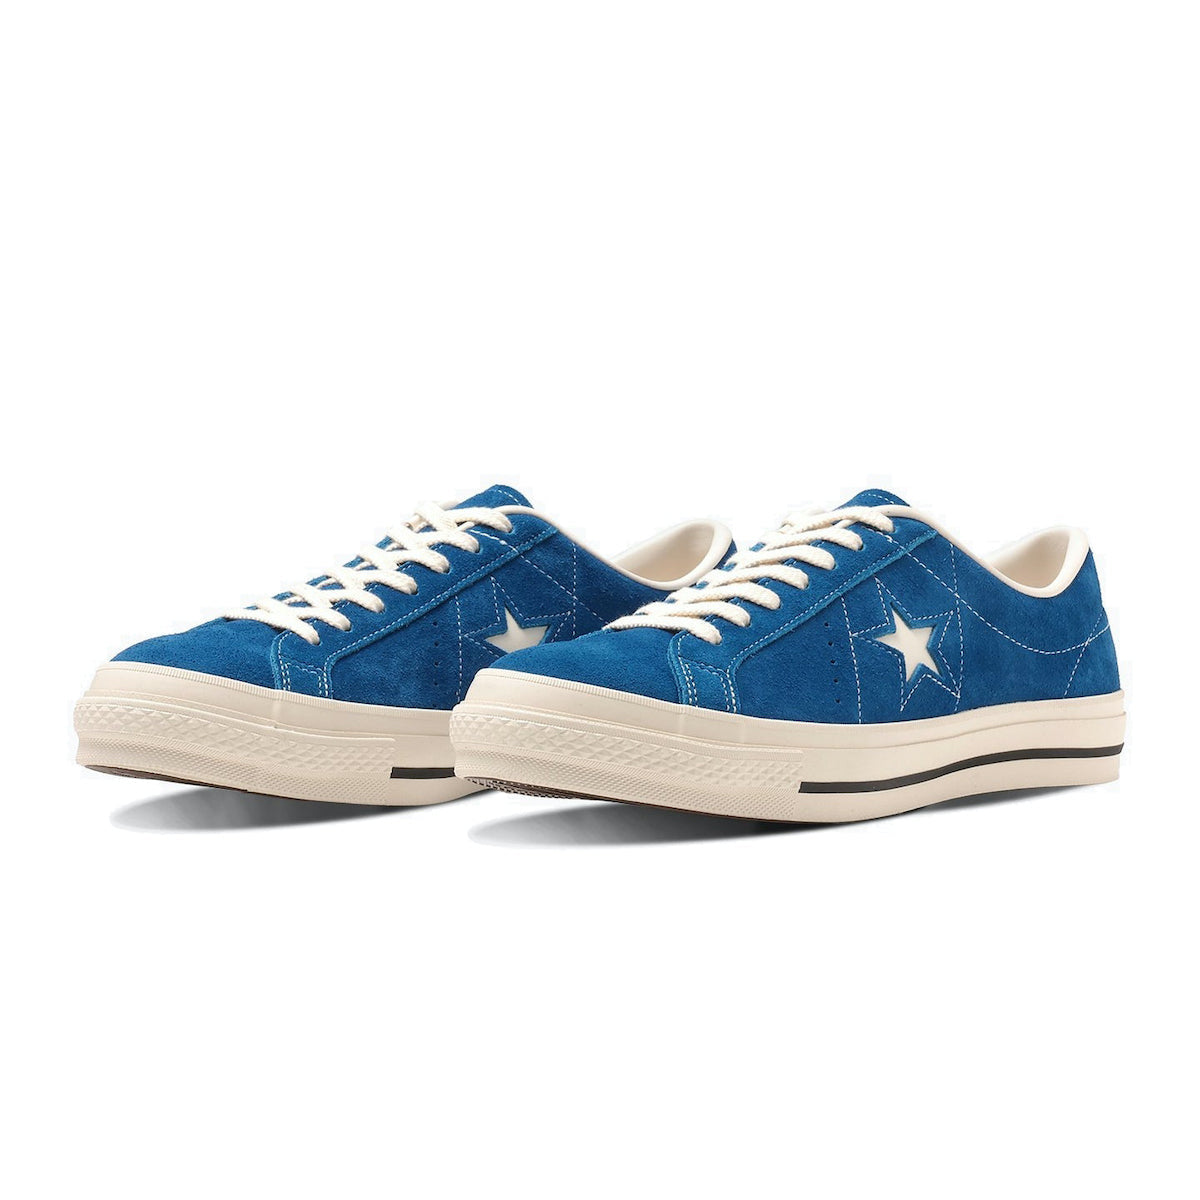 ONE STAR J SUEDE – Kinetics｜OFFICIAL ONLINE STORE